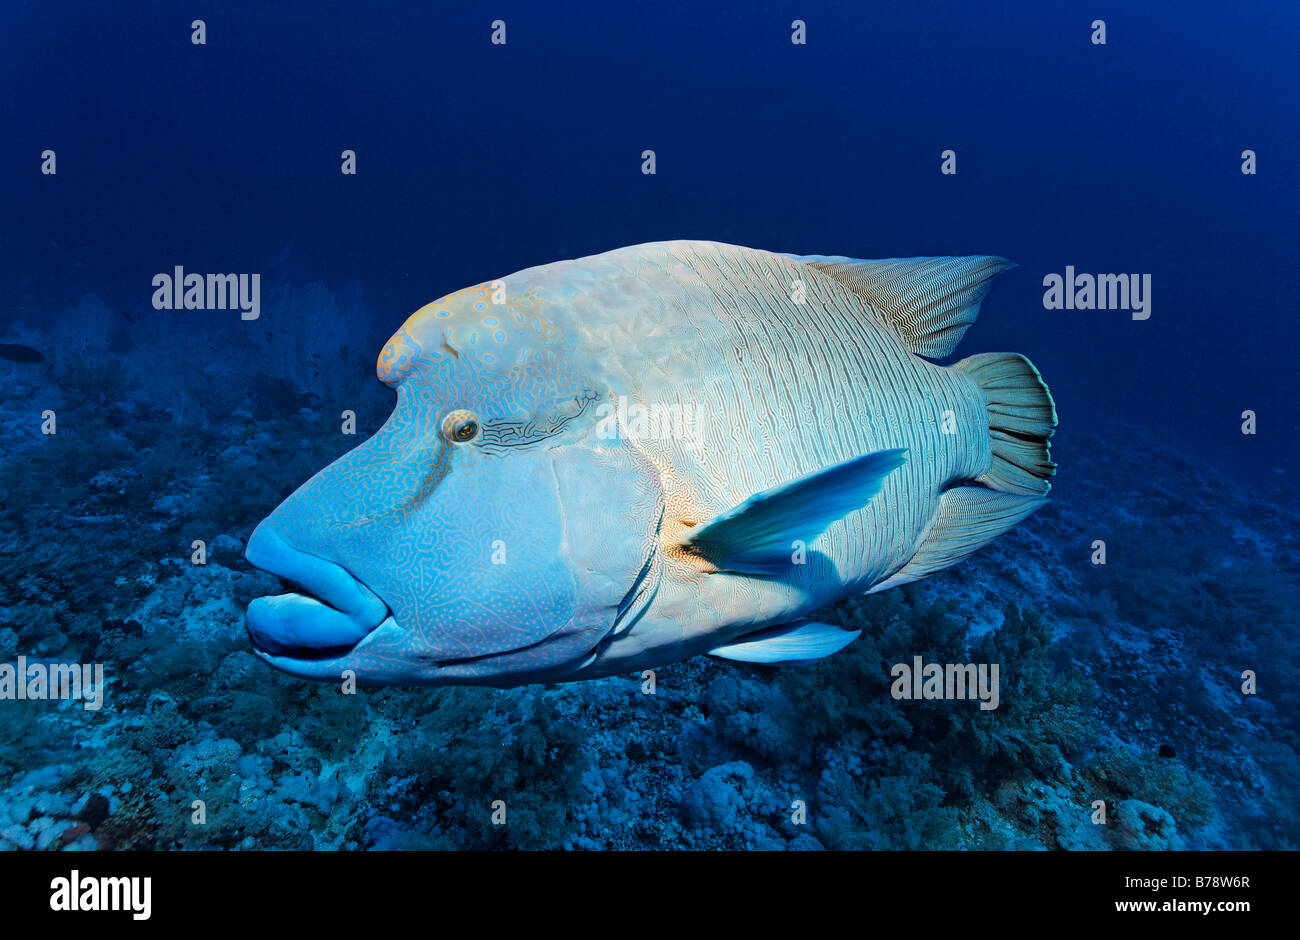 Humphead Wrasse (Cheilinus undulatus) swimming above coral reef, Brother Islands, Hurghada, Red Sea, Egypt, Africa Stock Photo